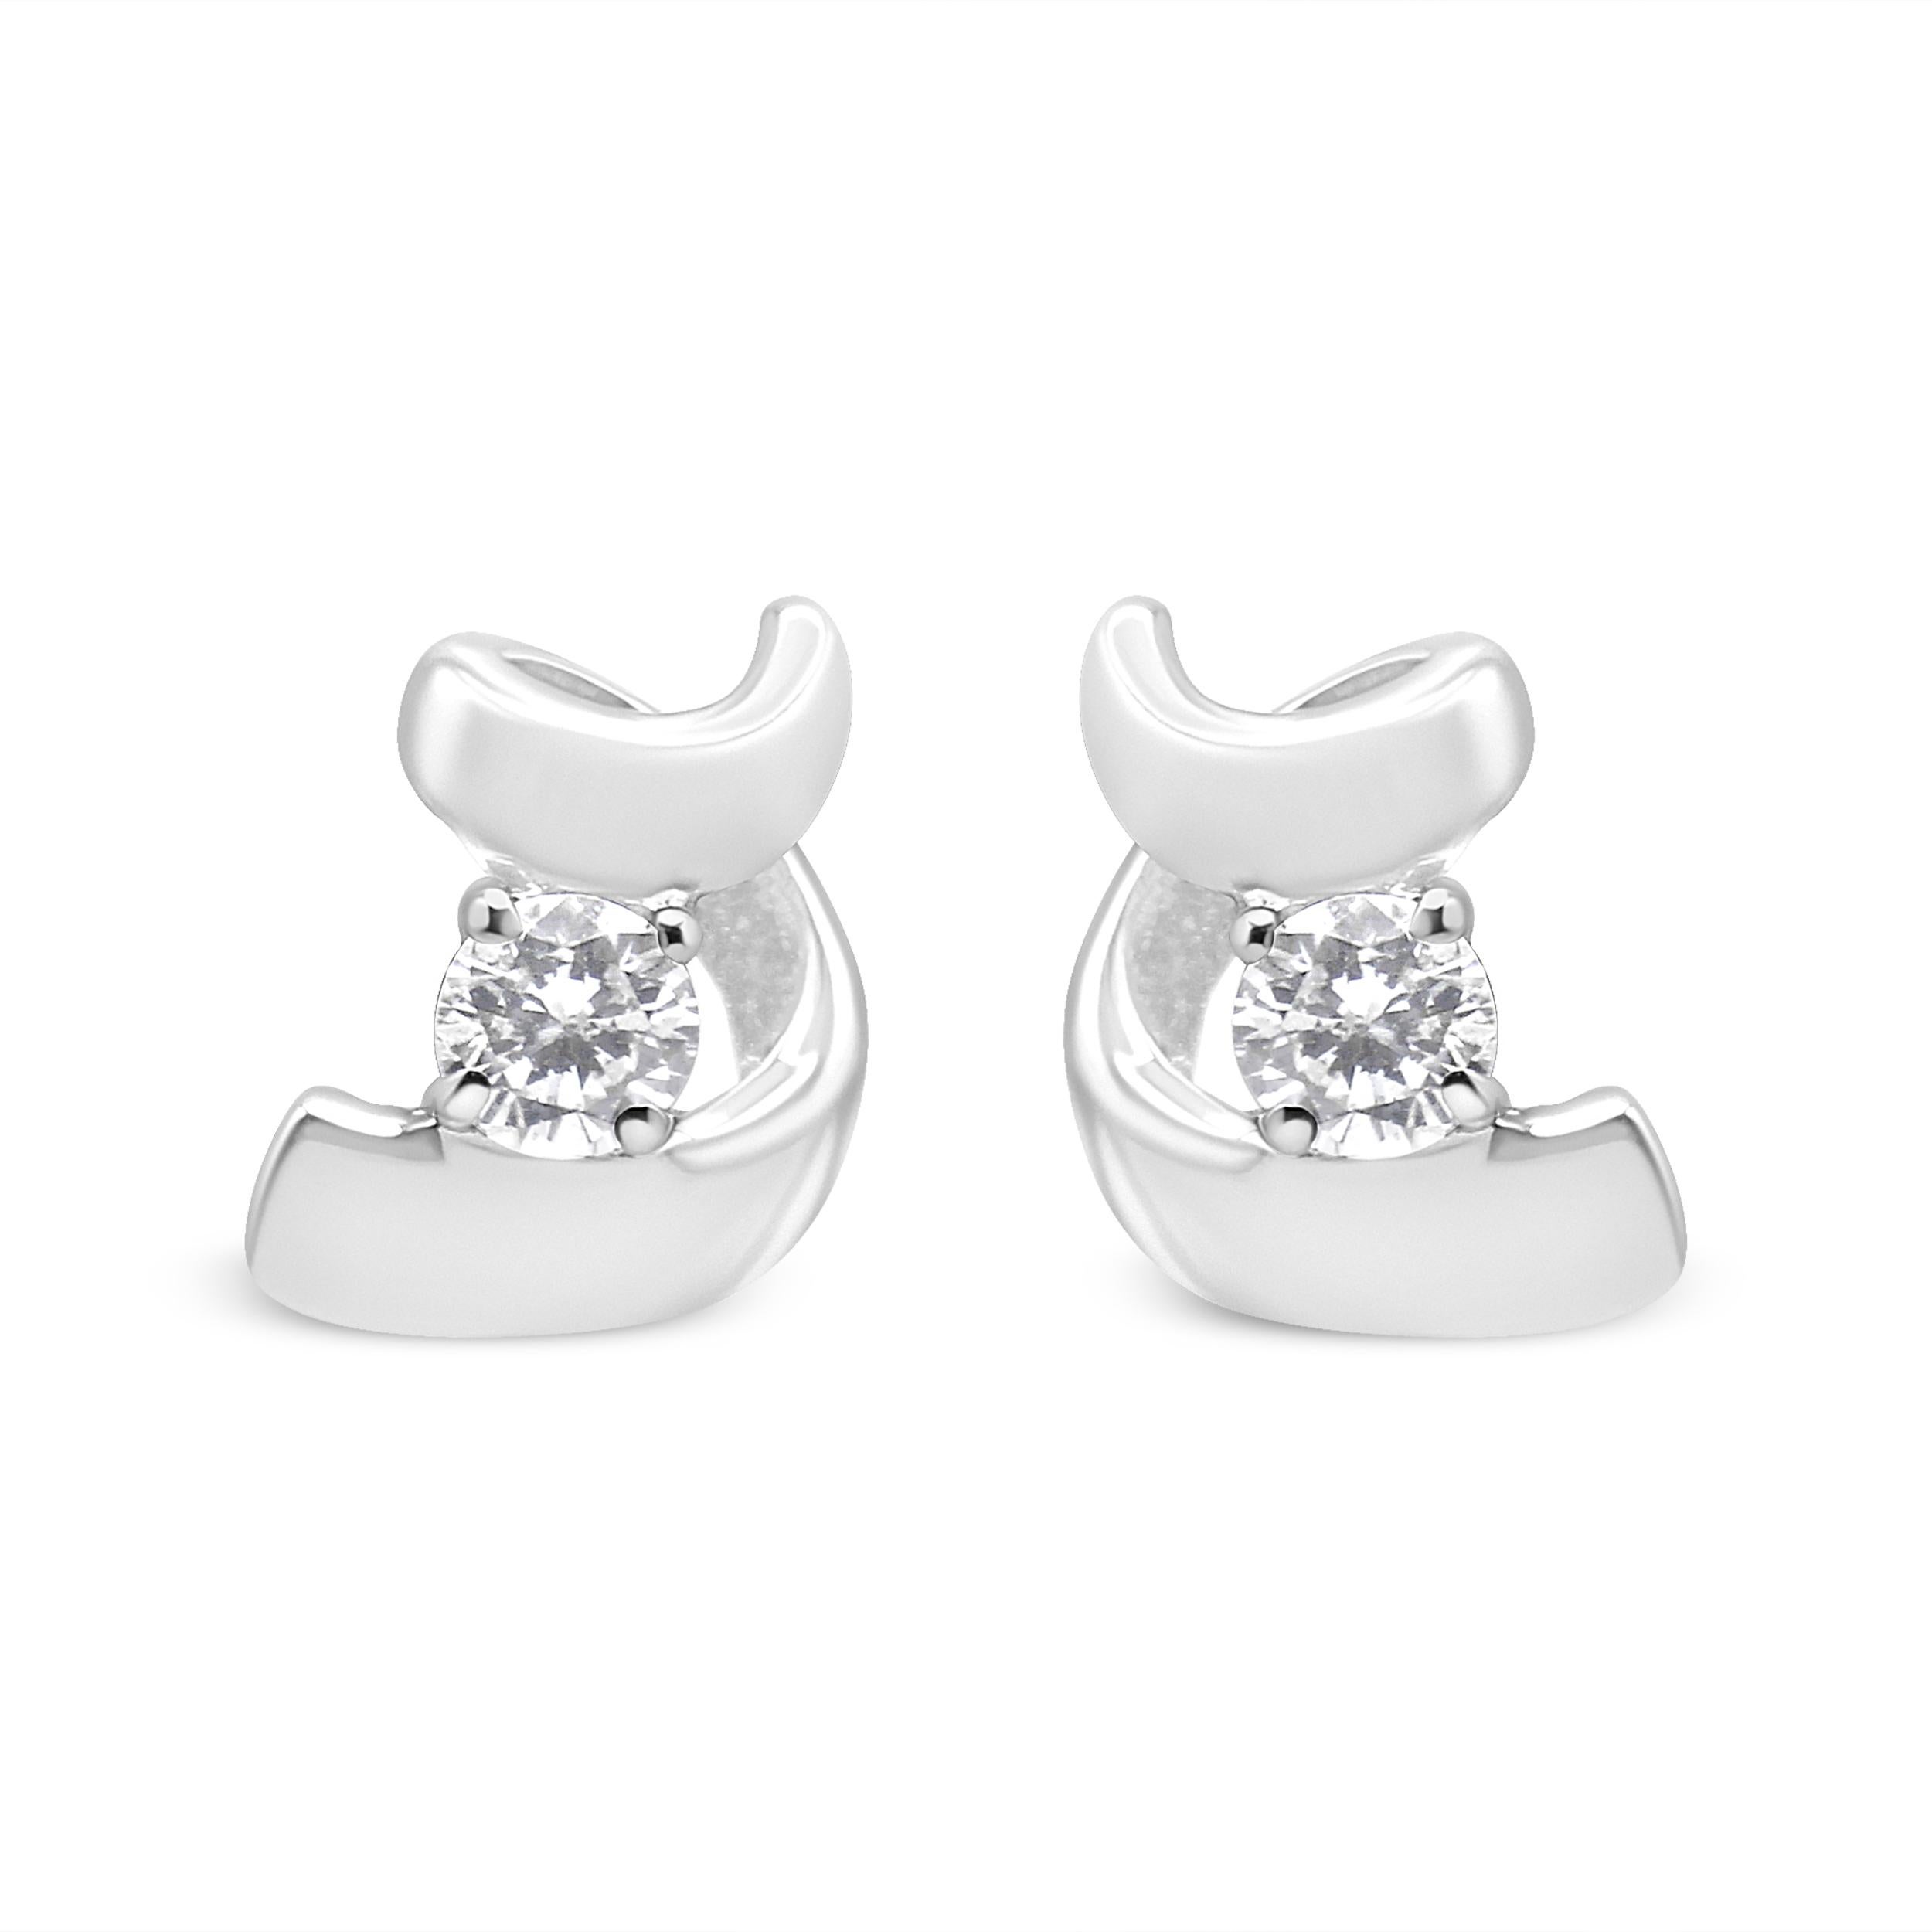 Add an instant glow to your look with these stunning diamond earrings. Designed with elegance, the earrings are made using premium quality sterling silver. Each piece is adorned with shimmering round cut diamonds in a prong setting. These stylish